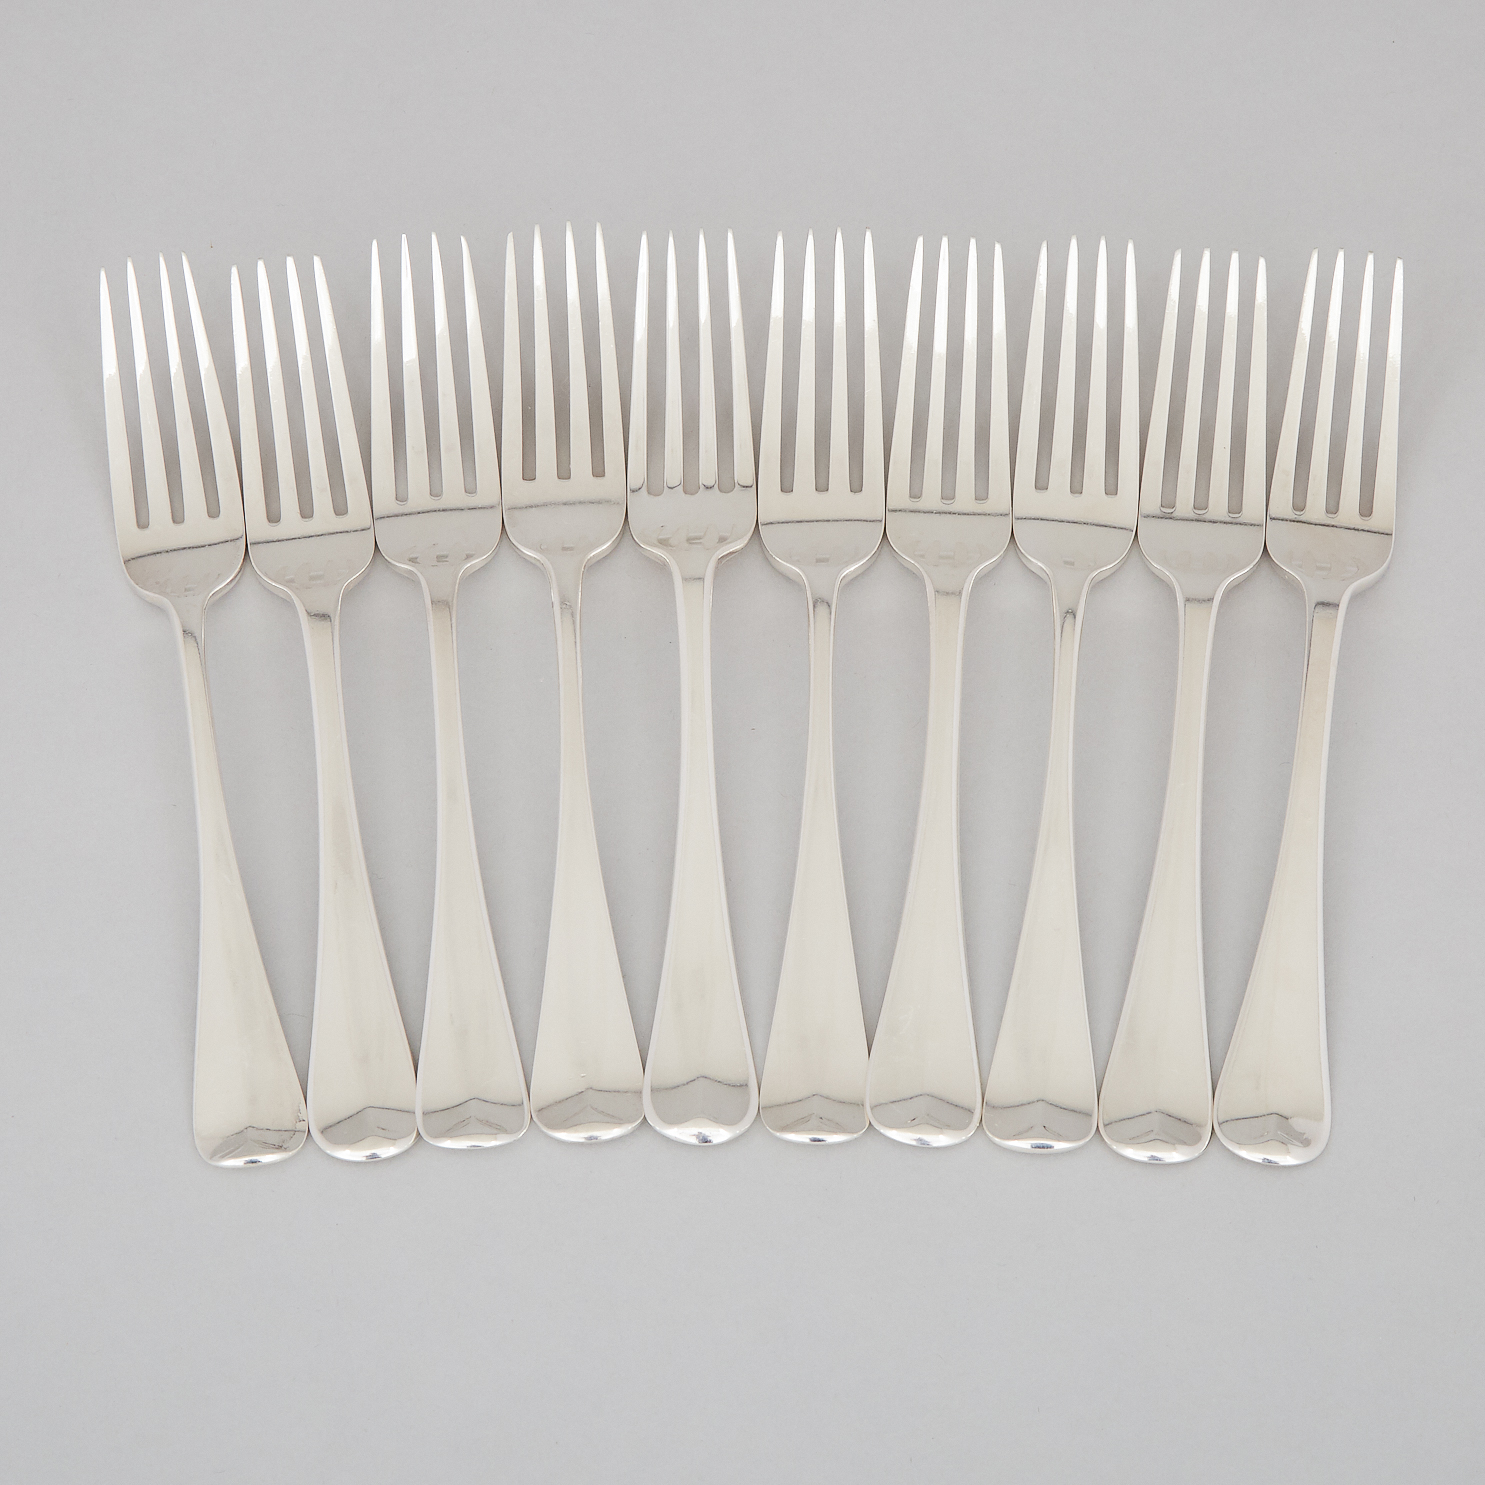 Ten George III Silver Old English Pattern Table Forks, London, 1807-16